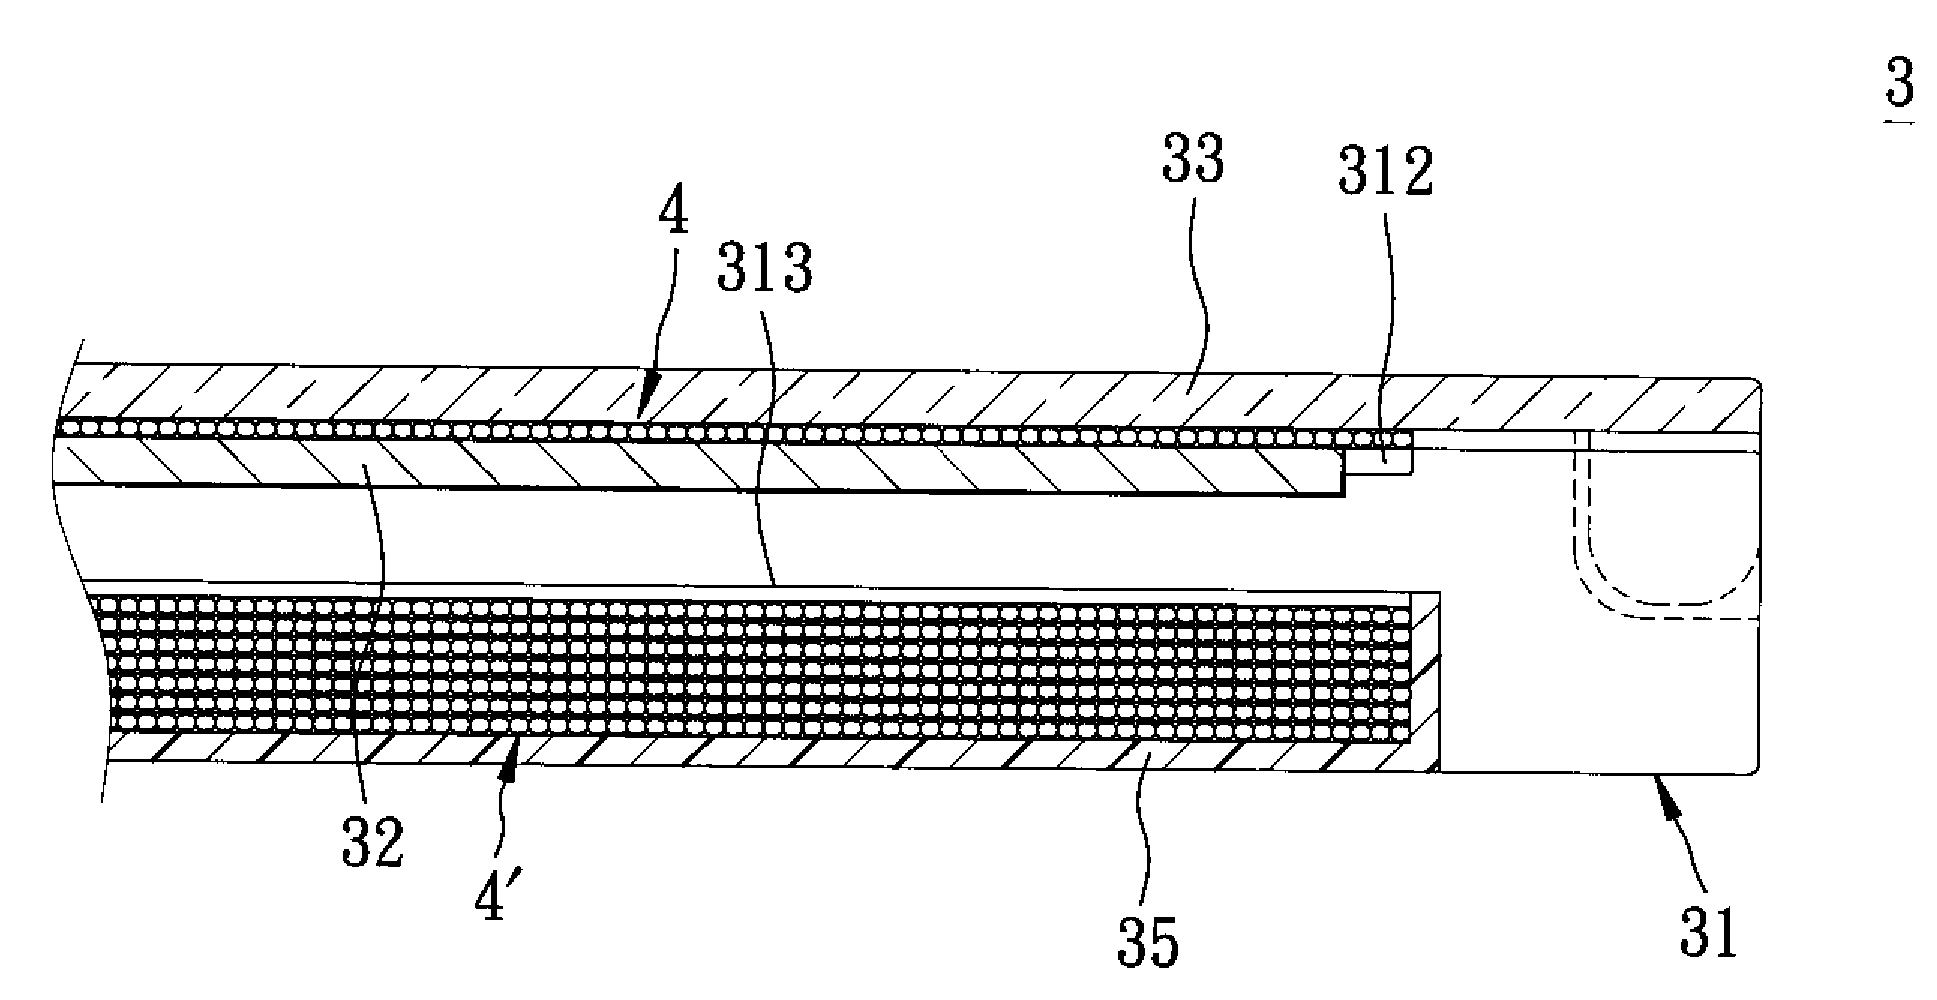 Electronic device capable of displaying digital image information on a removable sheet of electronic paper